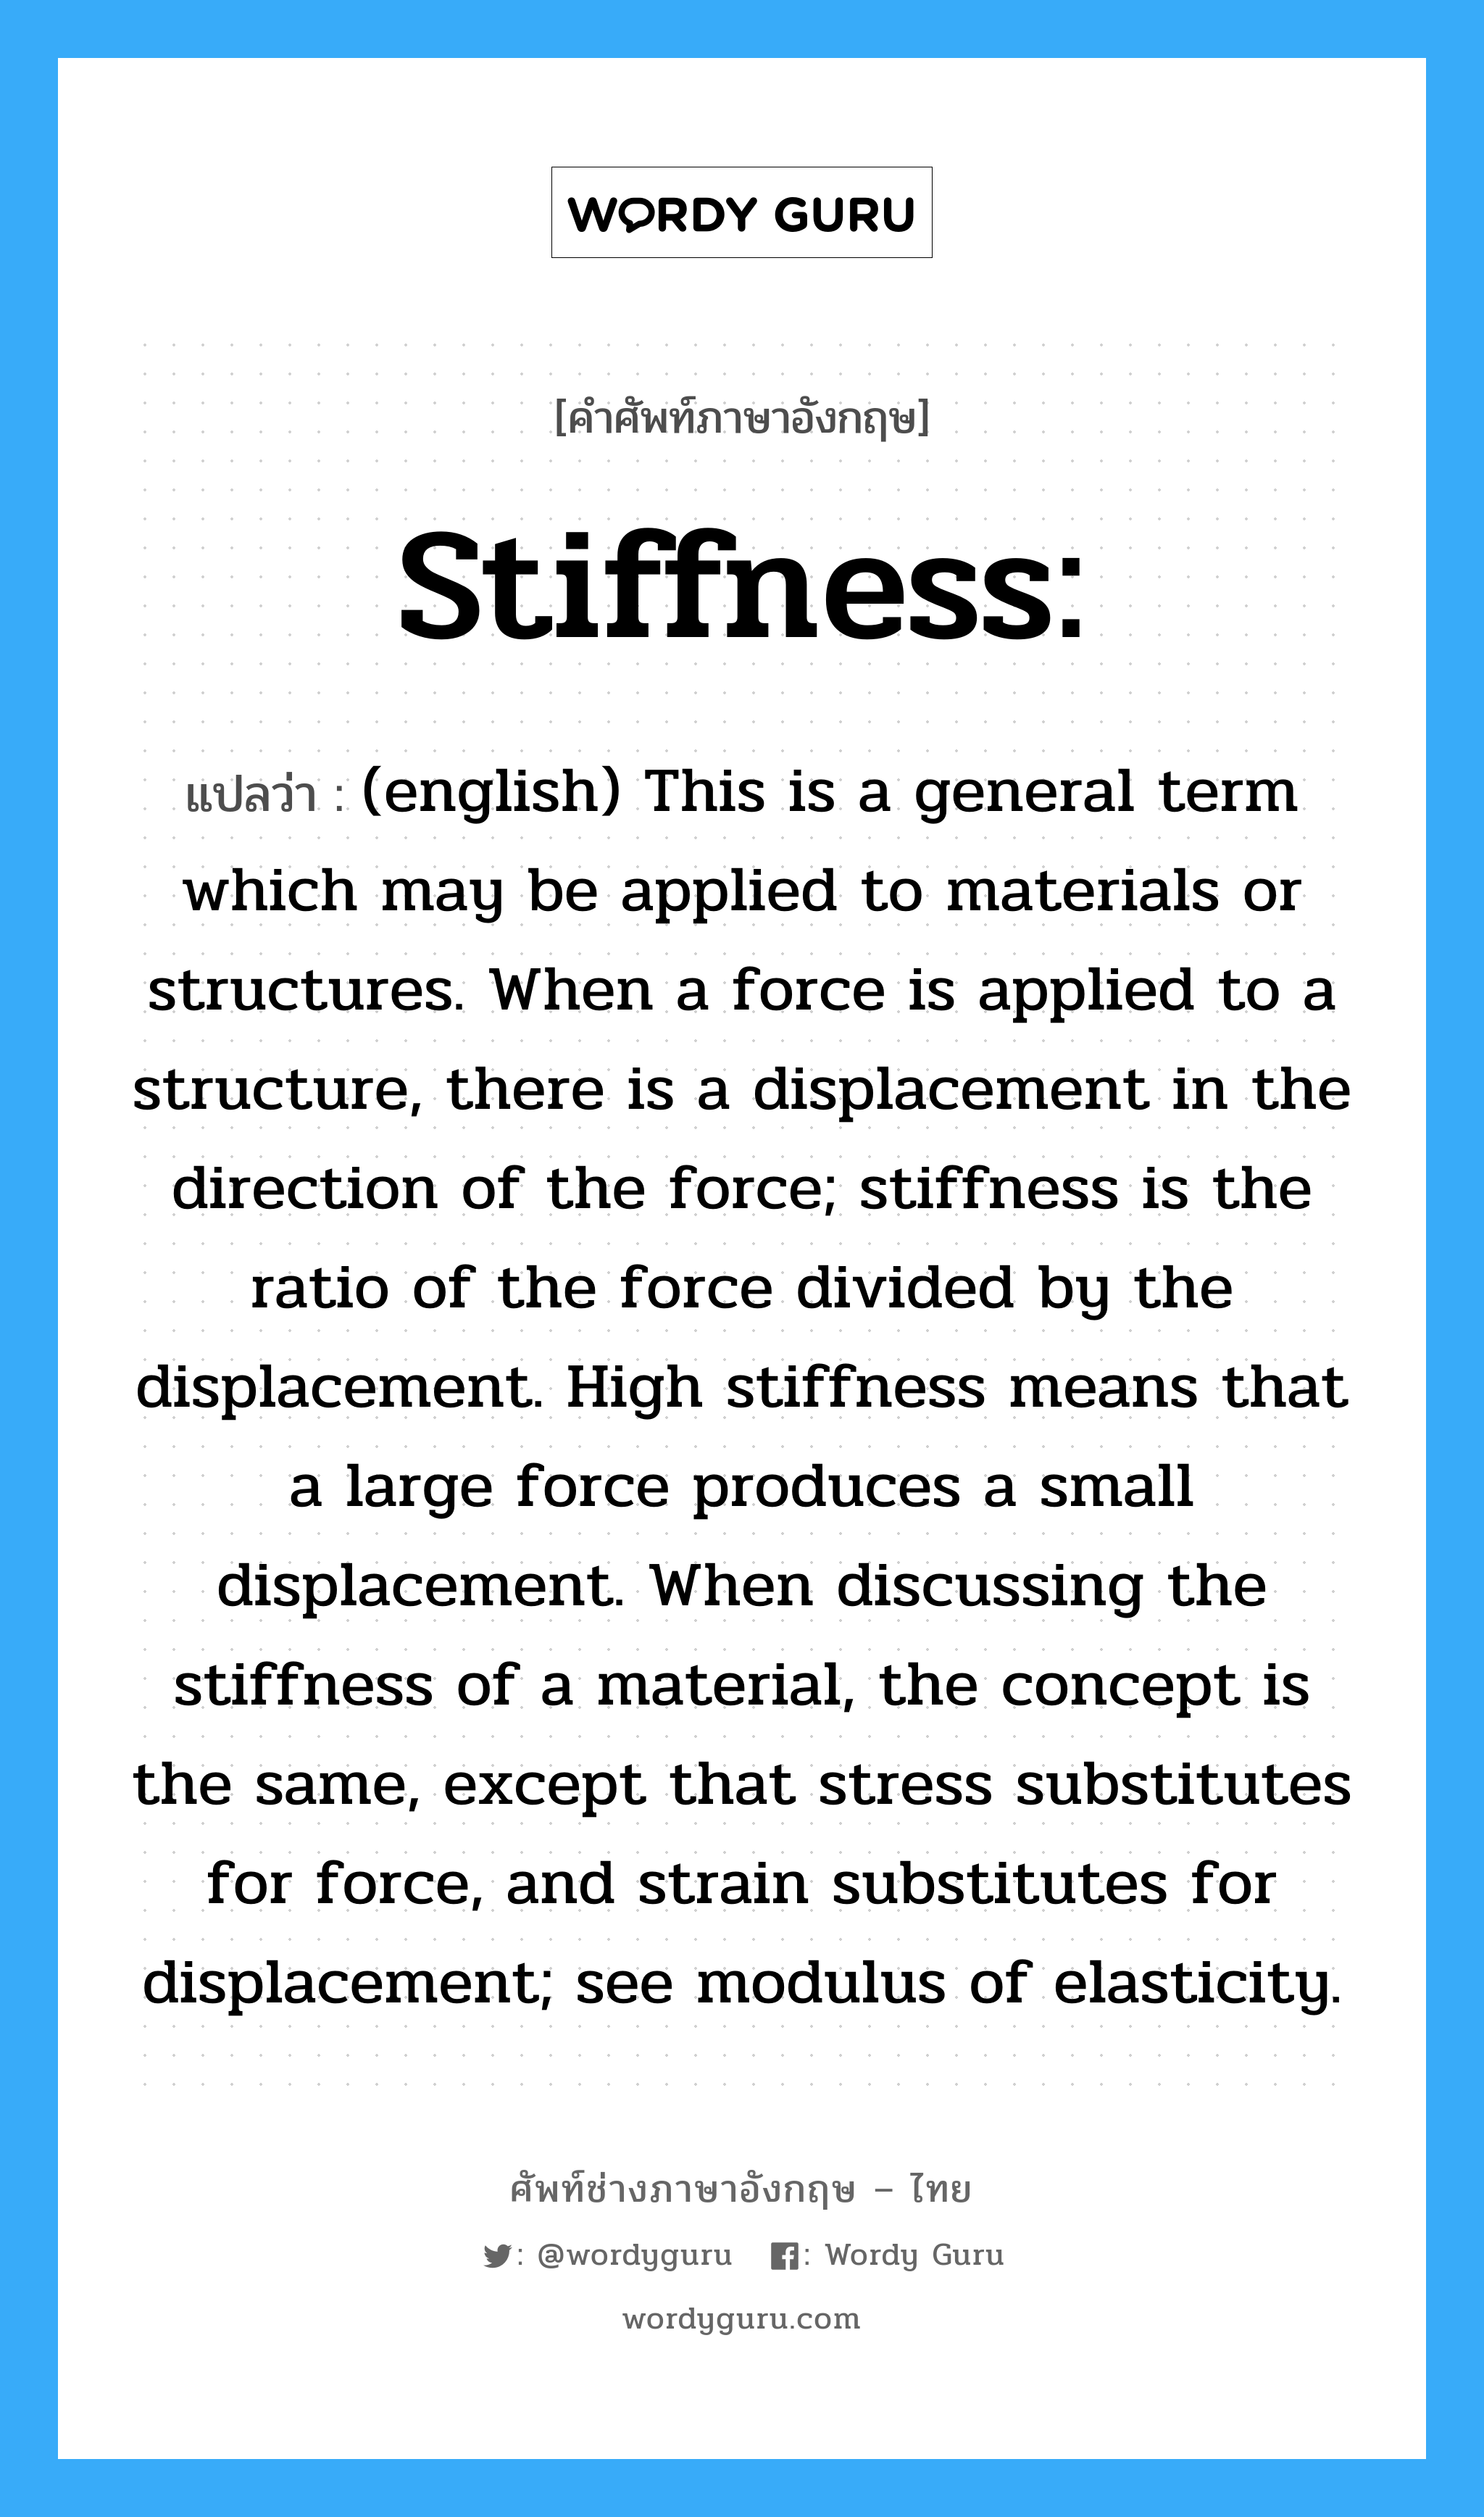 (english) This is a general term which may be applied to materials or structures. When a force is applied to a structure, there is a displacement in the direction of the force; stiffness is the ratio of the force divided by the displacement. High stiffness means that a large force produces a small displacement. When discussing the stiffness of a material, the concept is the same, except that stress substitutes for force, and strain substitutes for displacement; see modulus of elasticity. ภาษาอังกฤษ?, คำศัพท์ช่างภาษาอังกฤษ - ไทย (english) This is a general term which may be applied to materials or structures. When a force is applied to a structure, there is a displacement in the direction of the force; stiffness is the ratio of the force divided by the displacement. High stiffness means that a large force produces a small displacement. When discussing the stiffness of a material, the concept is the same, except that stress substitutes for force, and strain substitutes for displacement; see modulus of elasticity. คำศัพท์ภาษาอังกฤษ (english) This is a general term which may be applied to materials or structures. When a force is applied to a structure, there is a displacement in the direction of the force; stiffness is the ratio of the force divided by the displacement. High stiffness means that a large force produces a small displacement. When discussing the stiffness of a material, the concept is the same, except that stress substitutes for force, and strain substitutes for displacement; see modulus of elasticity. แปลว่า Stiffness: